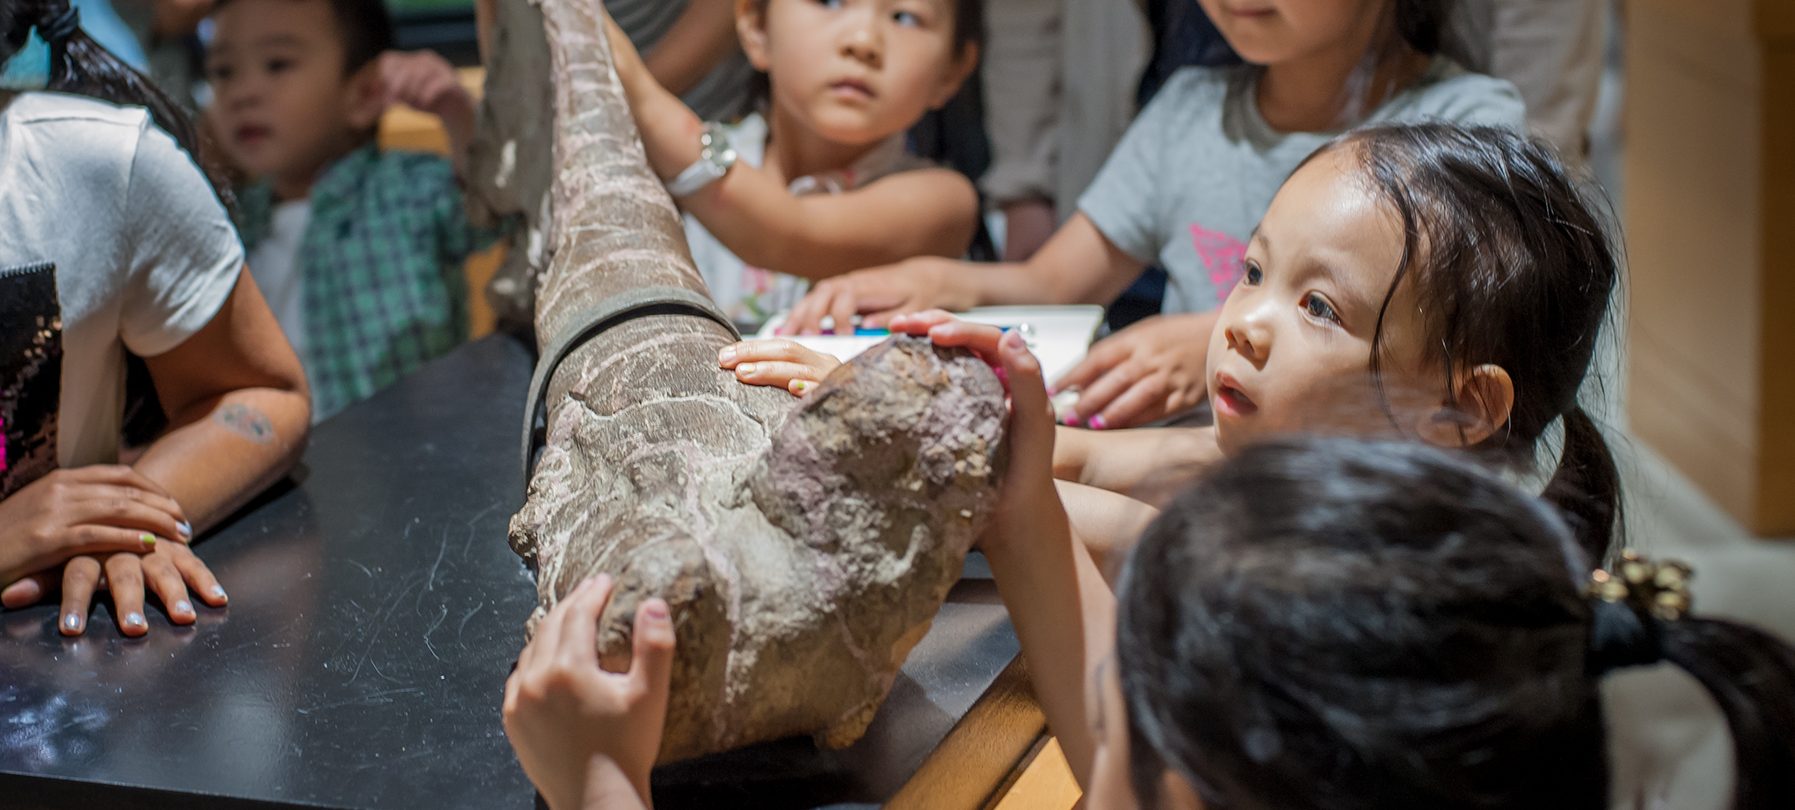 A child looks up in awe at a facilitator as they touch a fossilized dinosaur bone in the Main Gallery of the museum